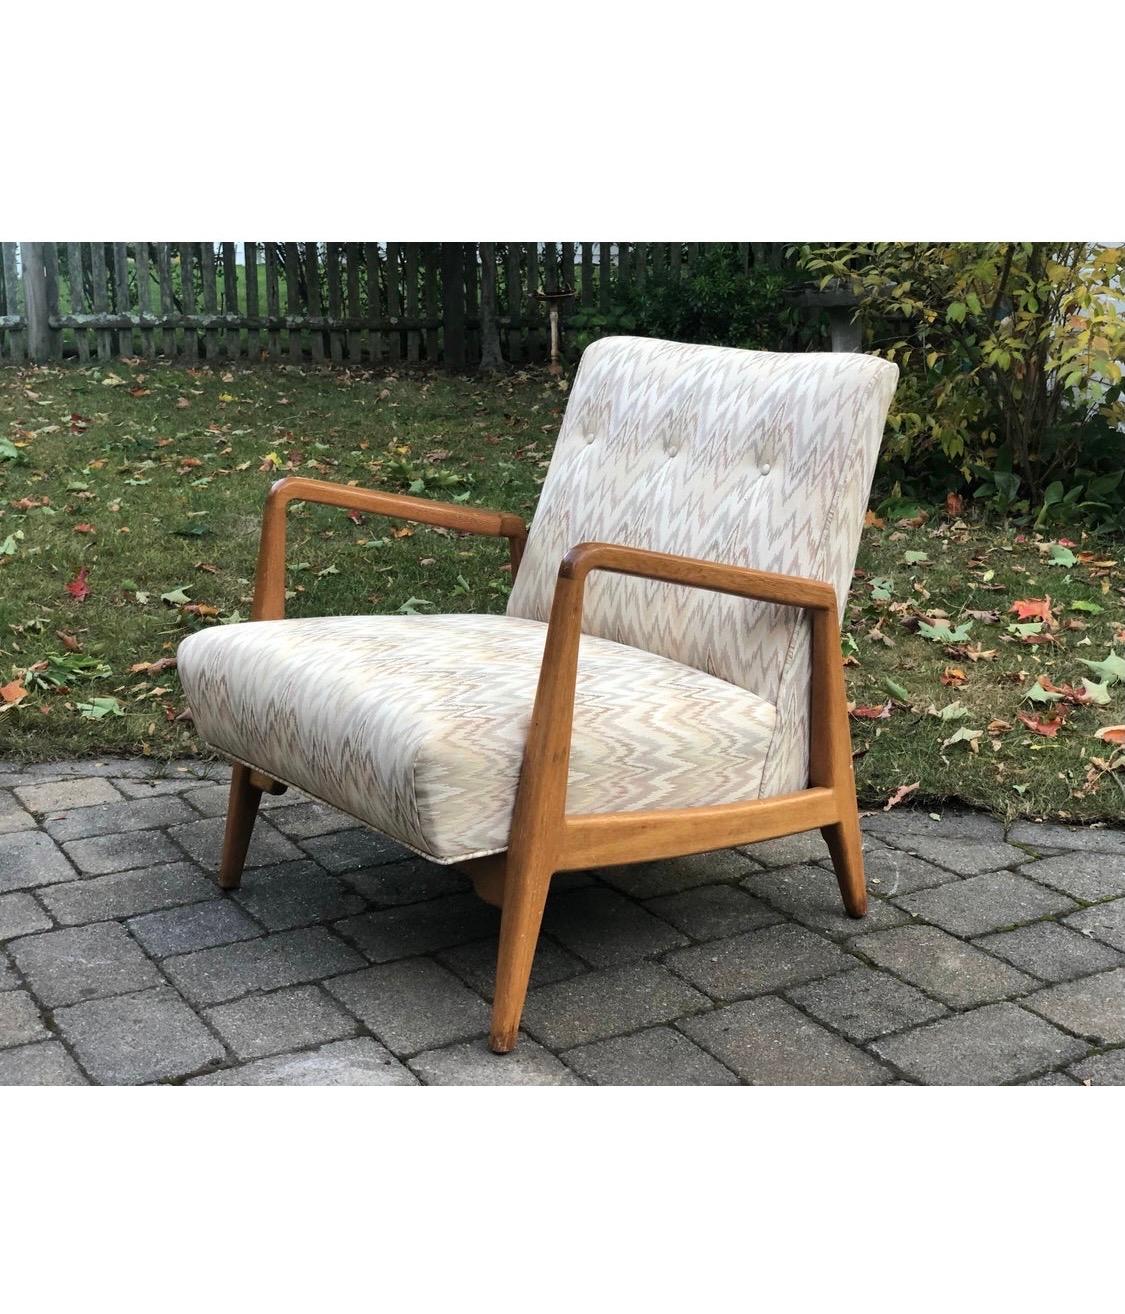 A model U-420 lounge chair by Jens Risom in highly figured walnut. The low lounge chair, U-420 is one
of the most coveted in the midcentury cannon. All labels are present. Heavy construction. Good condition.